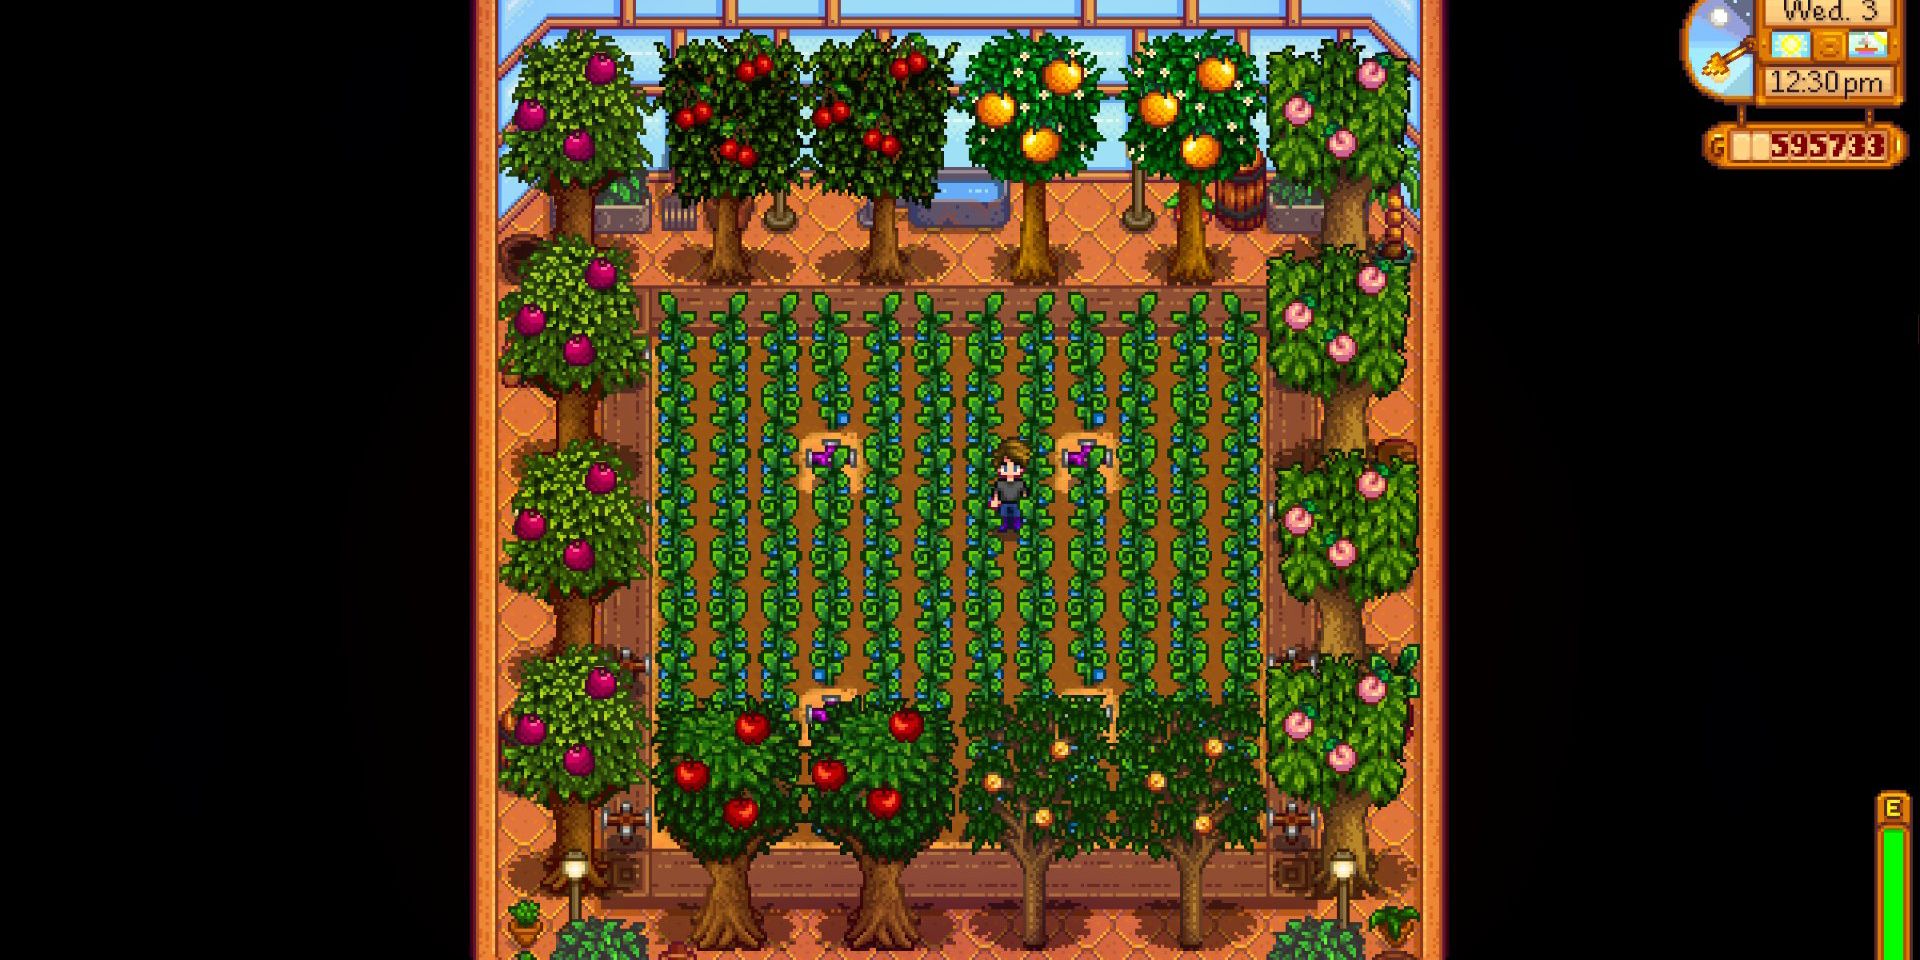 A full greenhouse in Stardew Valley, with Apple, Cherry, Orange, Peach, and Apricot trees surrounding the central garden plot